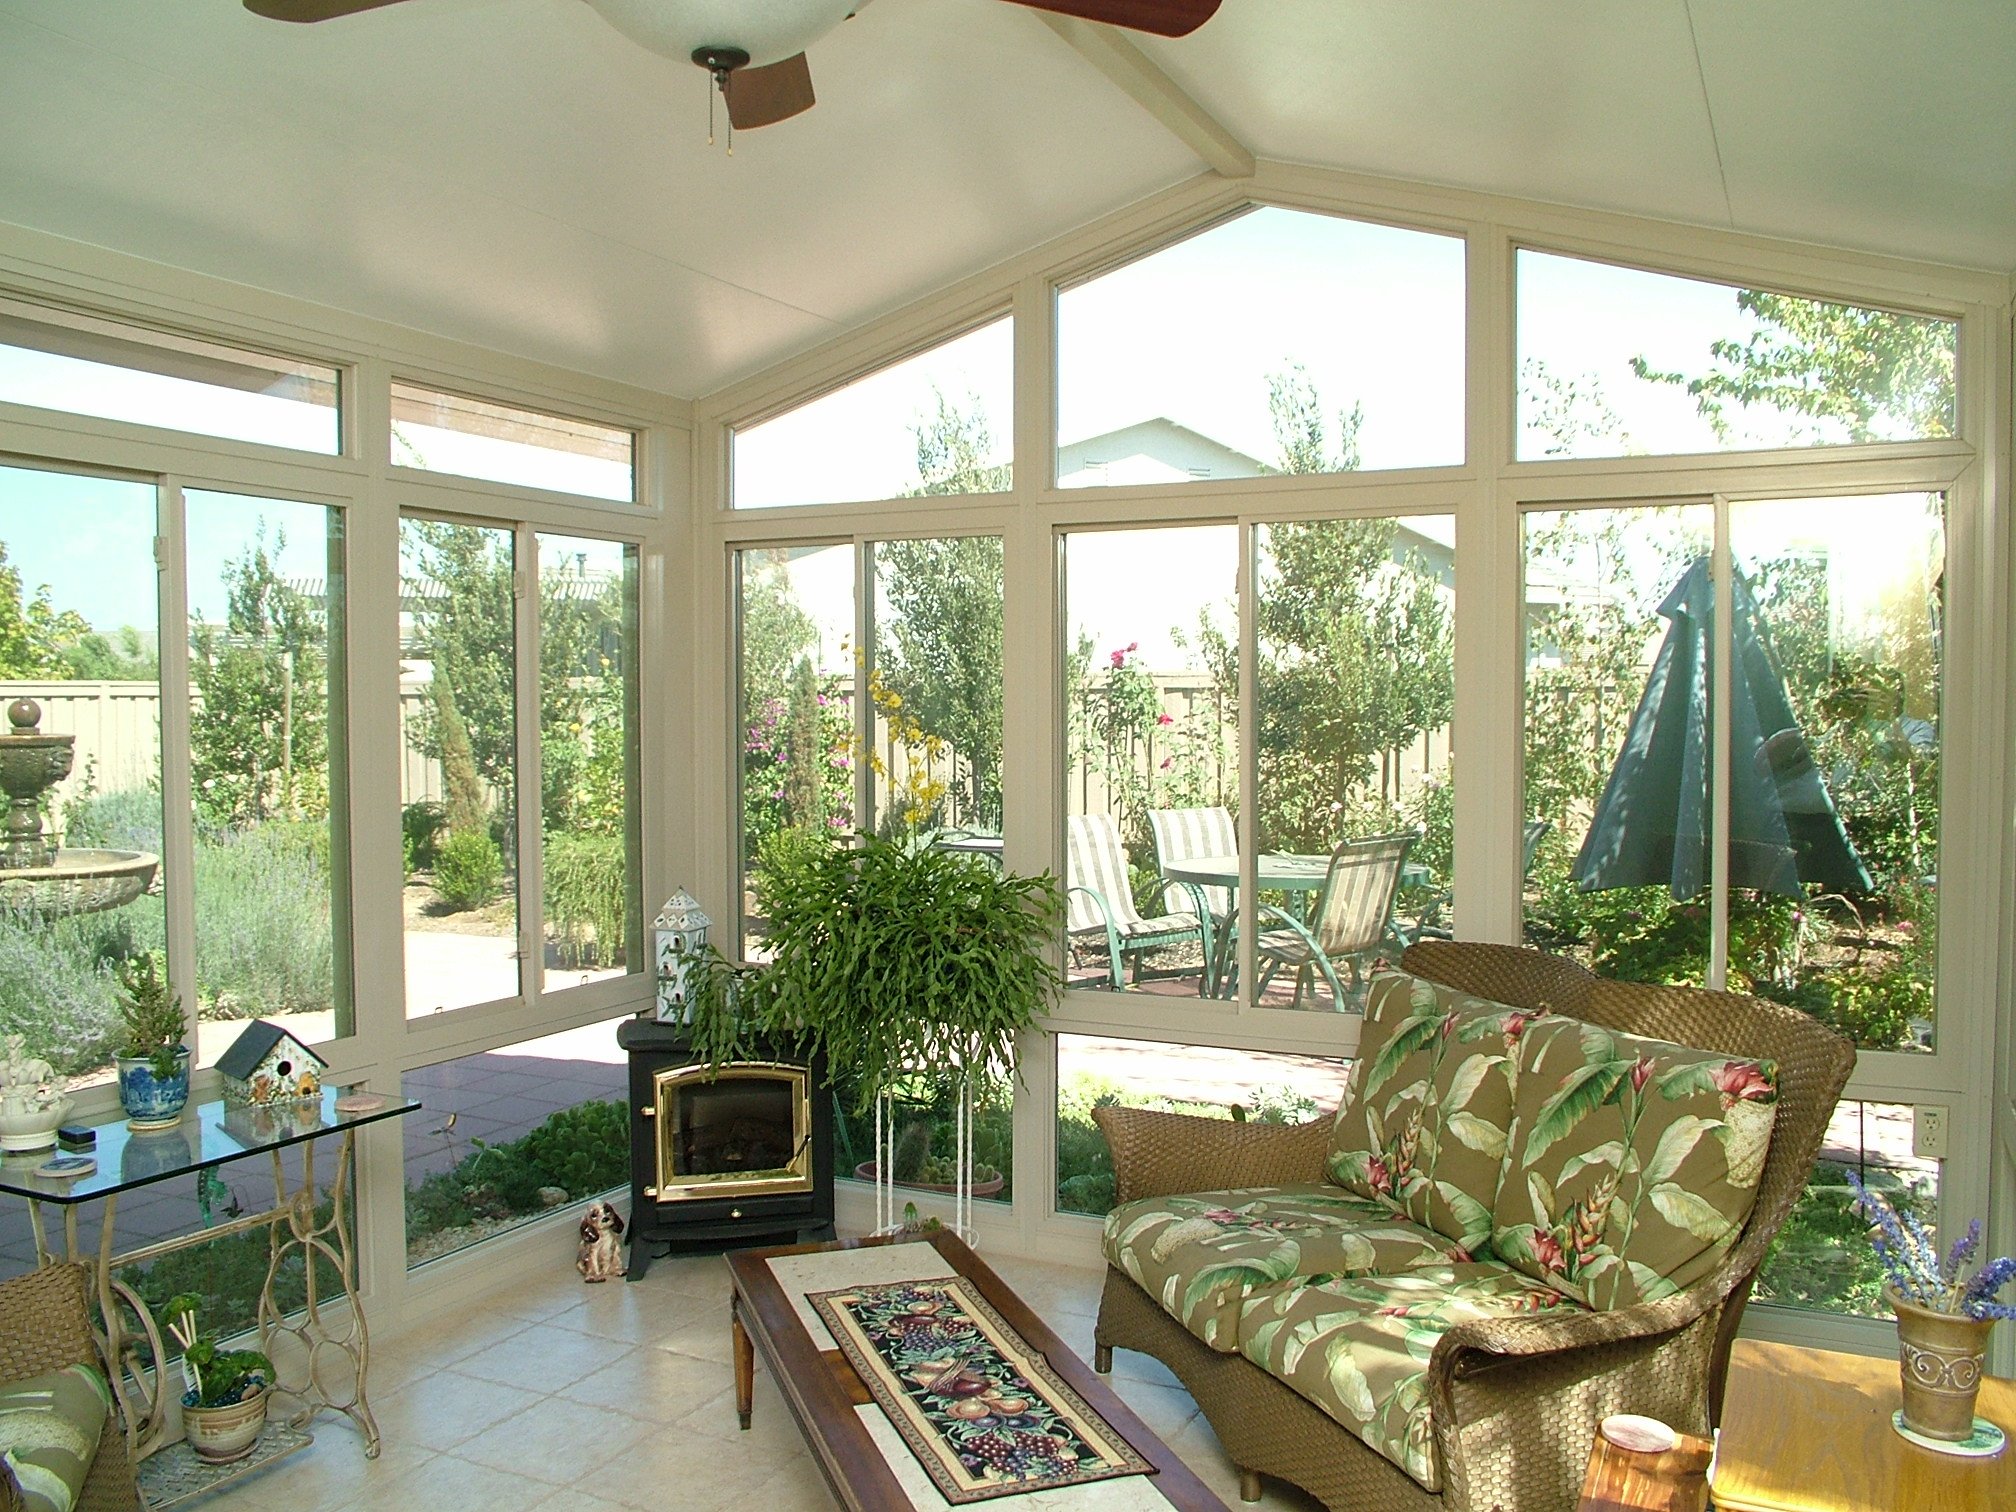 How Much Will a Sunroom Cost Me? - Pacific Builders Does A Sunroom Need A Foundation